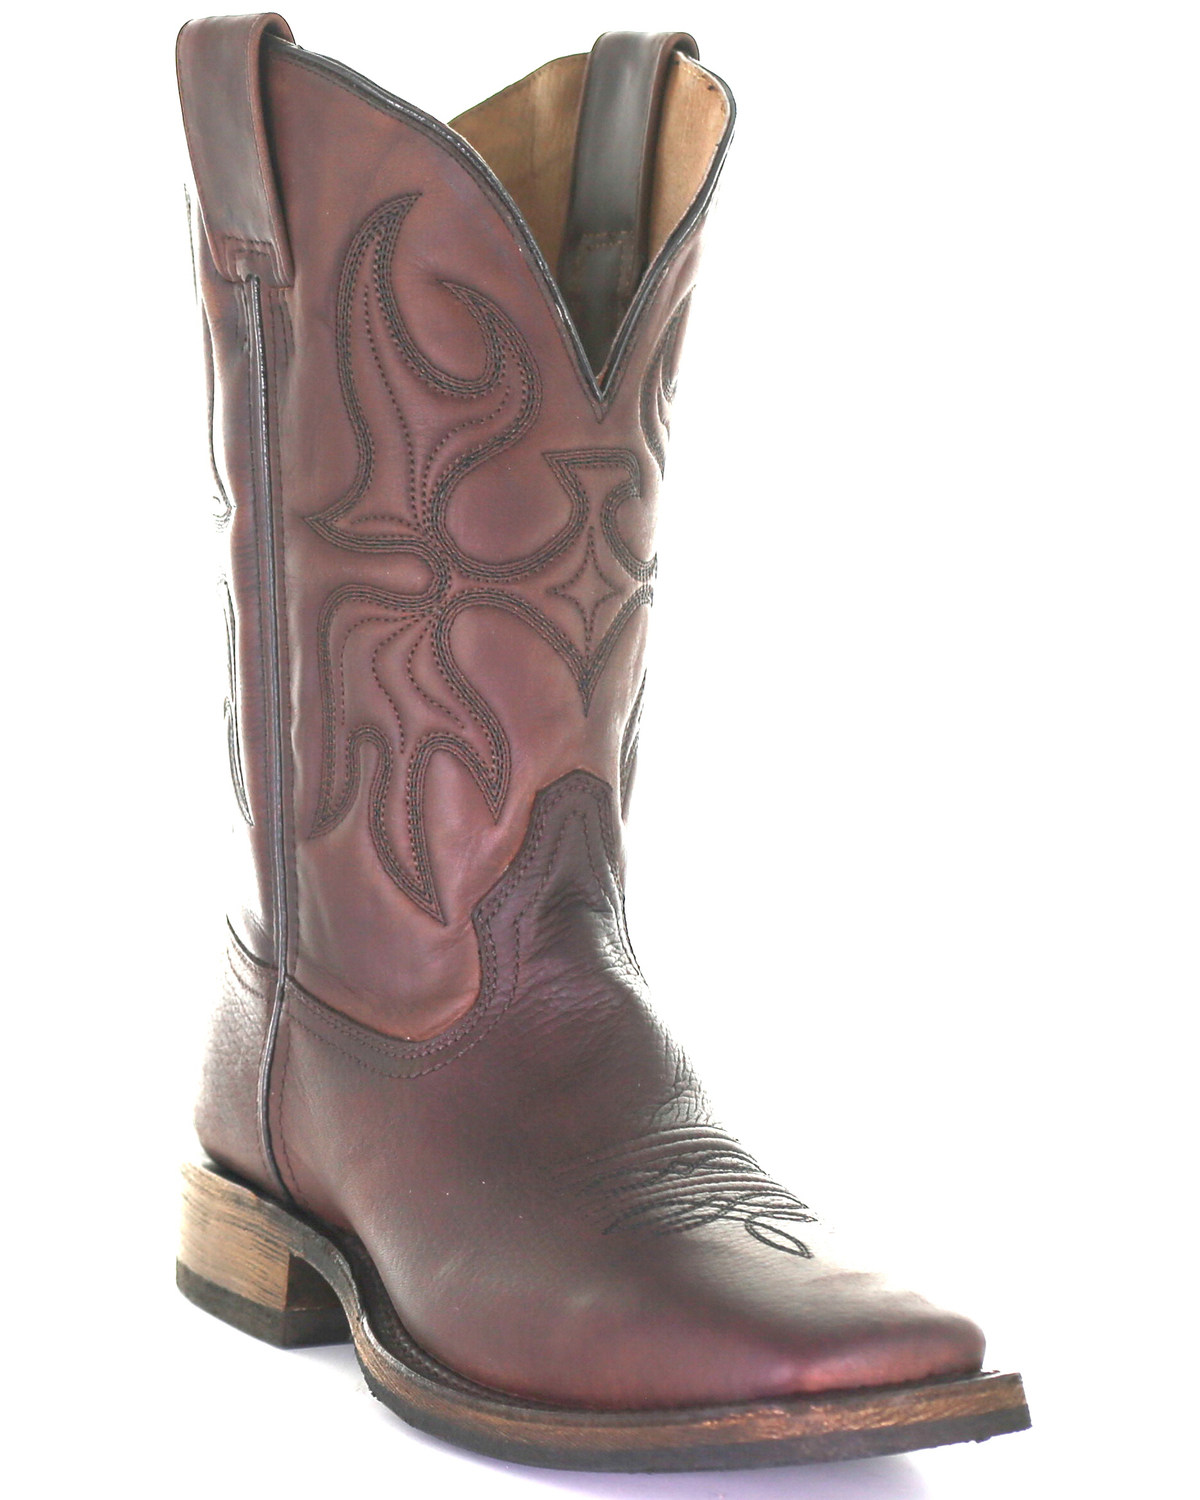 Corral Men's Chocolate Embroidery Western Boots - Broad Square Toe